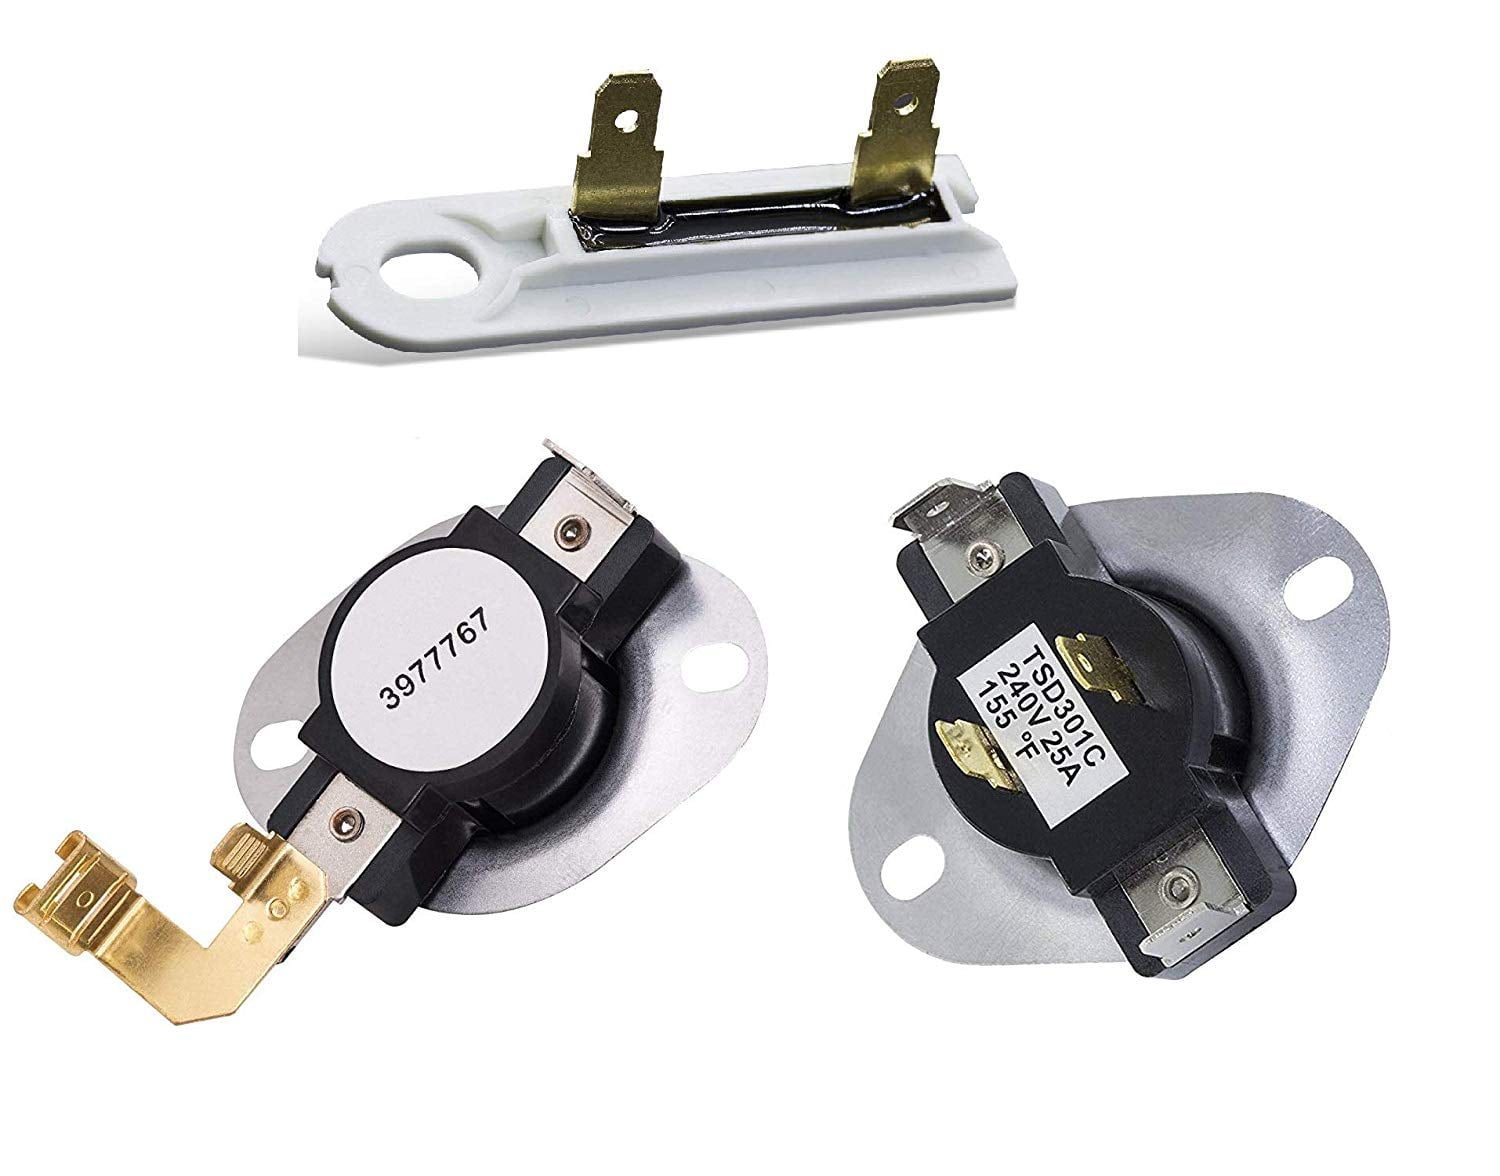 FITS HOTPOINT TUMBLE DRYER CUT OUT THERMOSTAT KIT PACK OF 2 